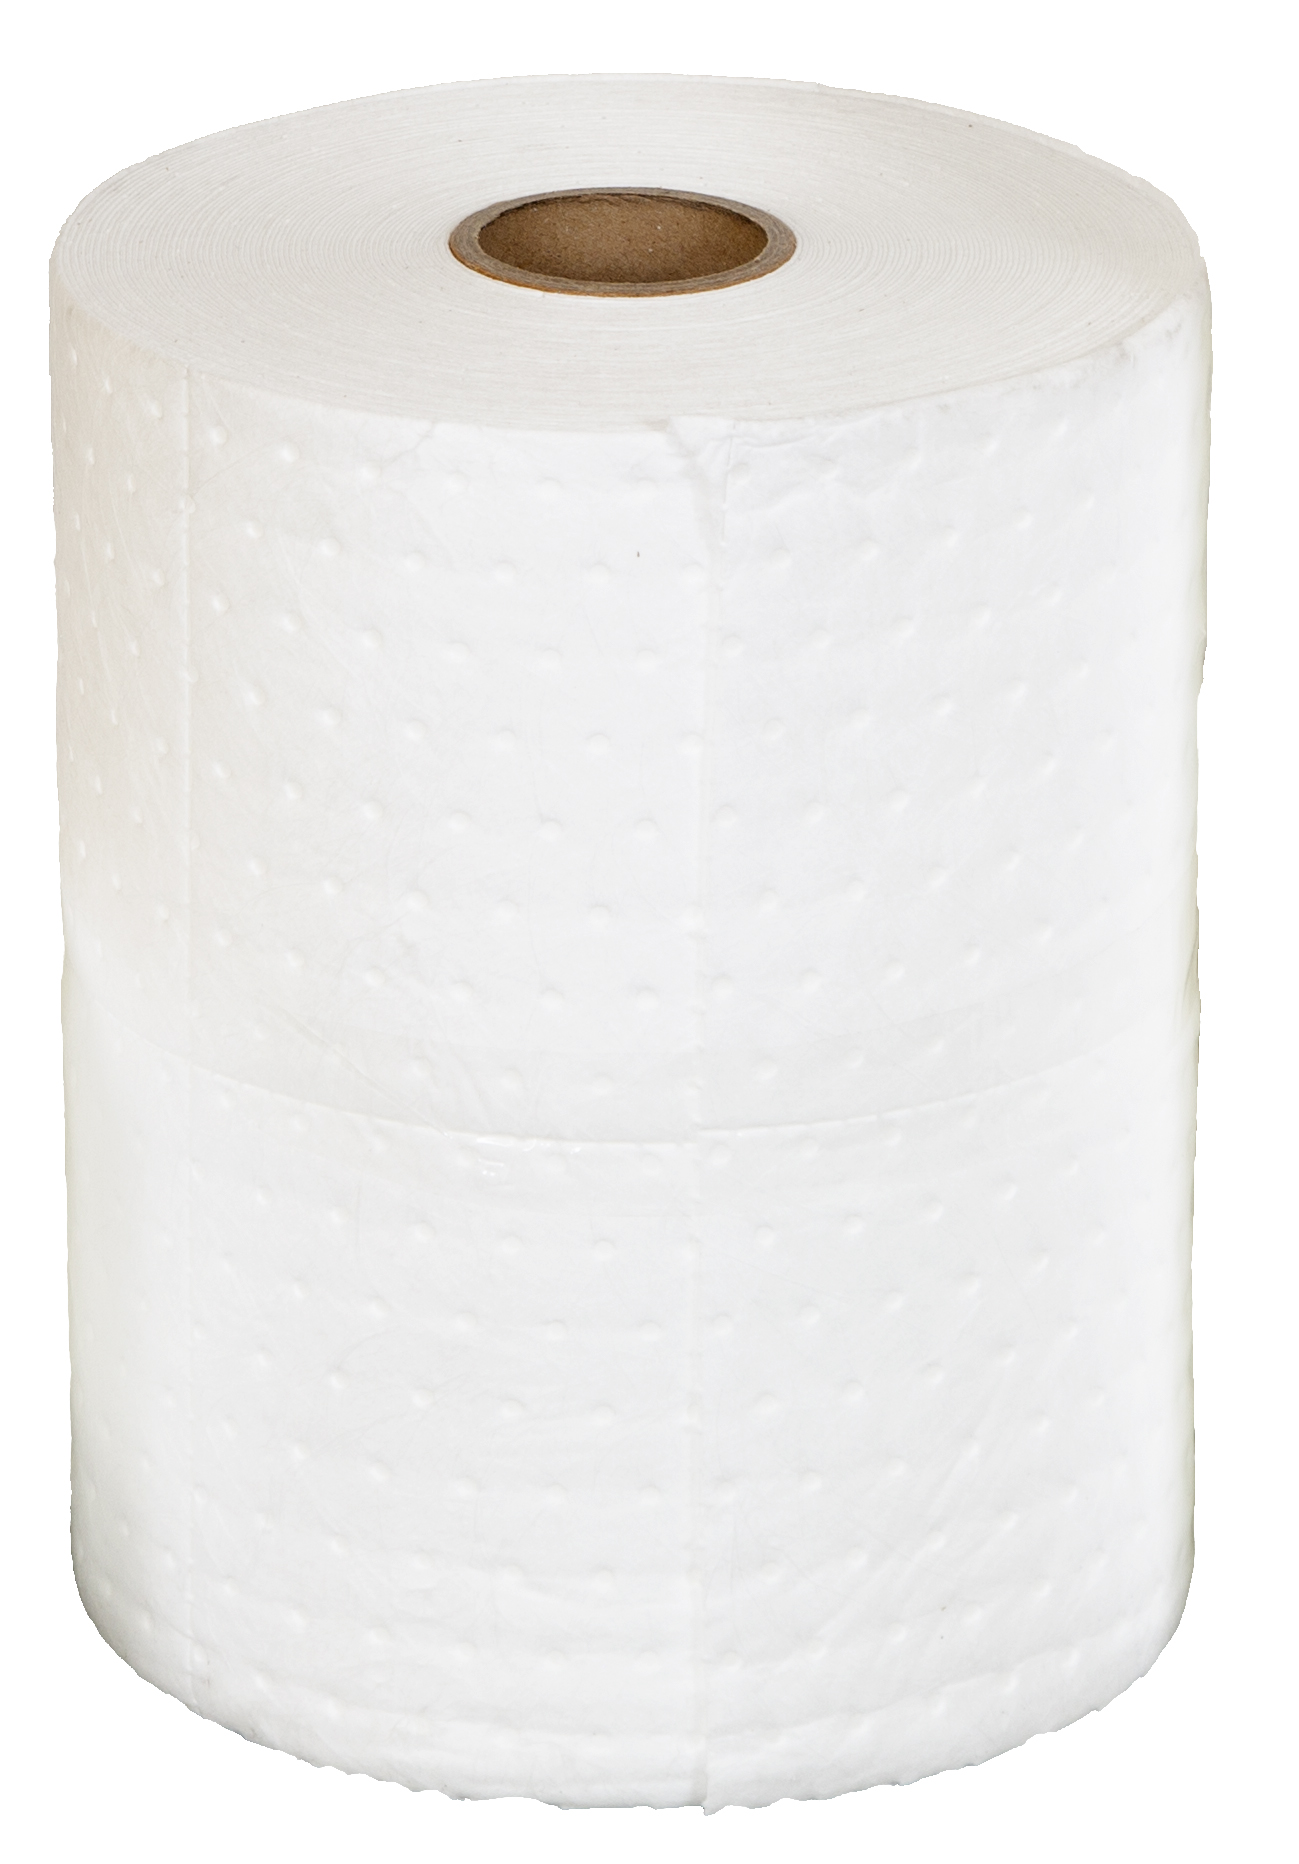 Poly pack of 1 Double Weight Oil & Fuel Absorbent Roll 38cm x 40m